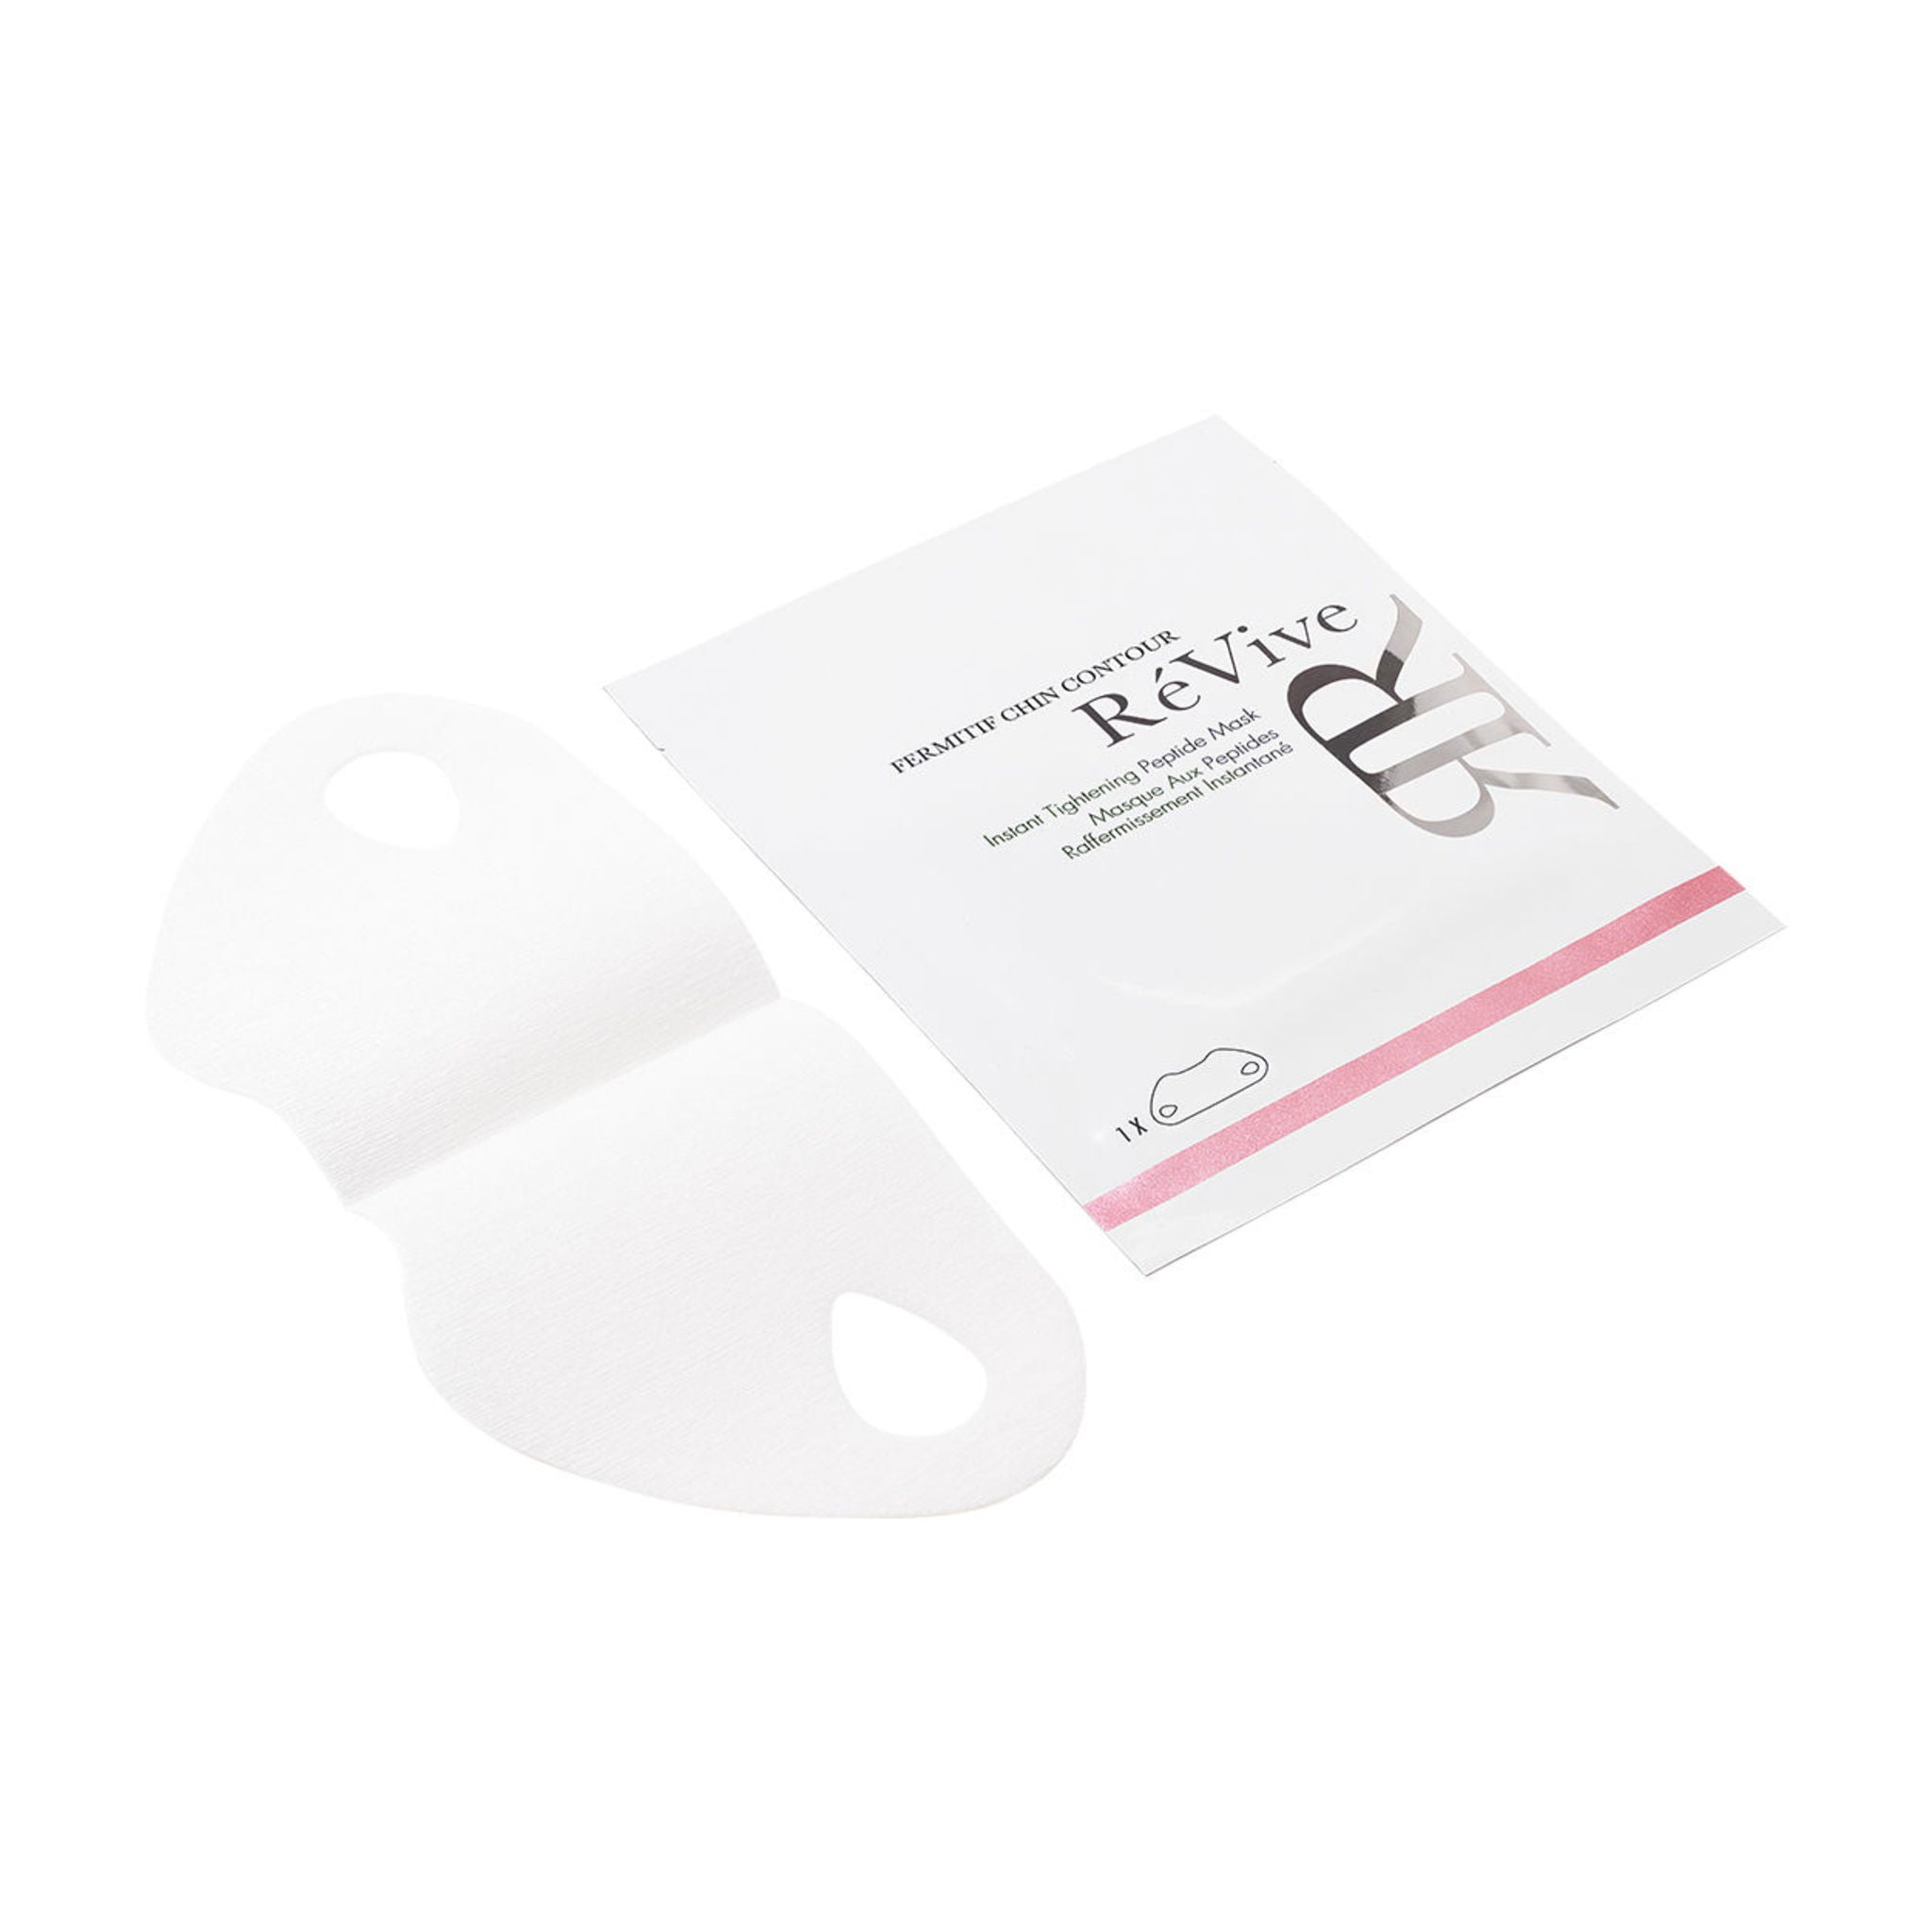 RéVive Fermitif Chin Contour Instant Tightening Peptide Mask Size variant: 6 treatments  main image.